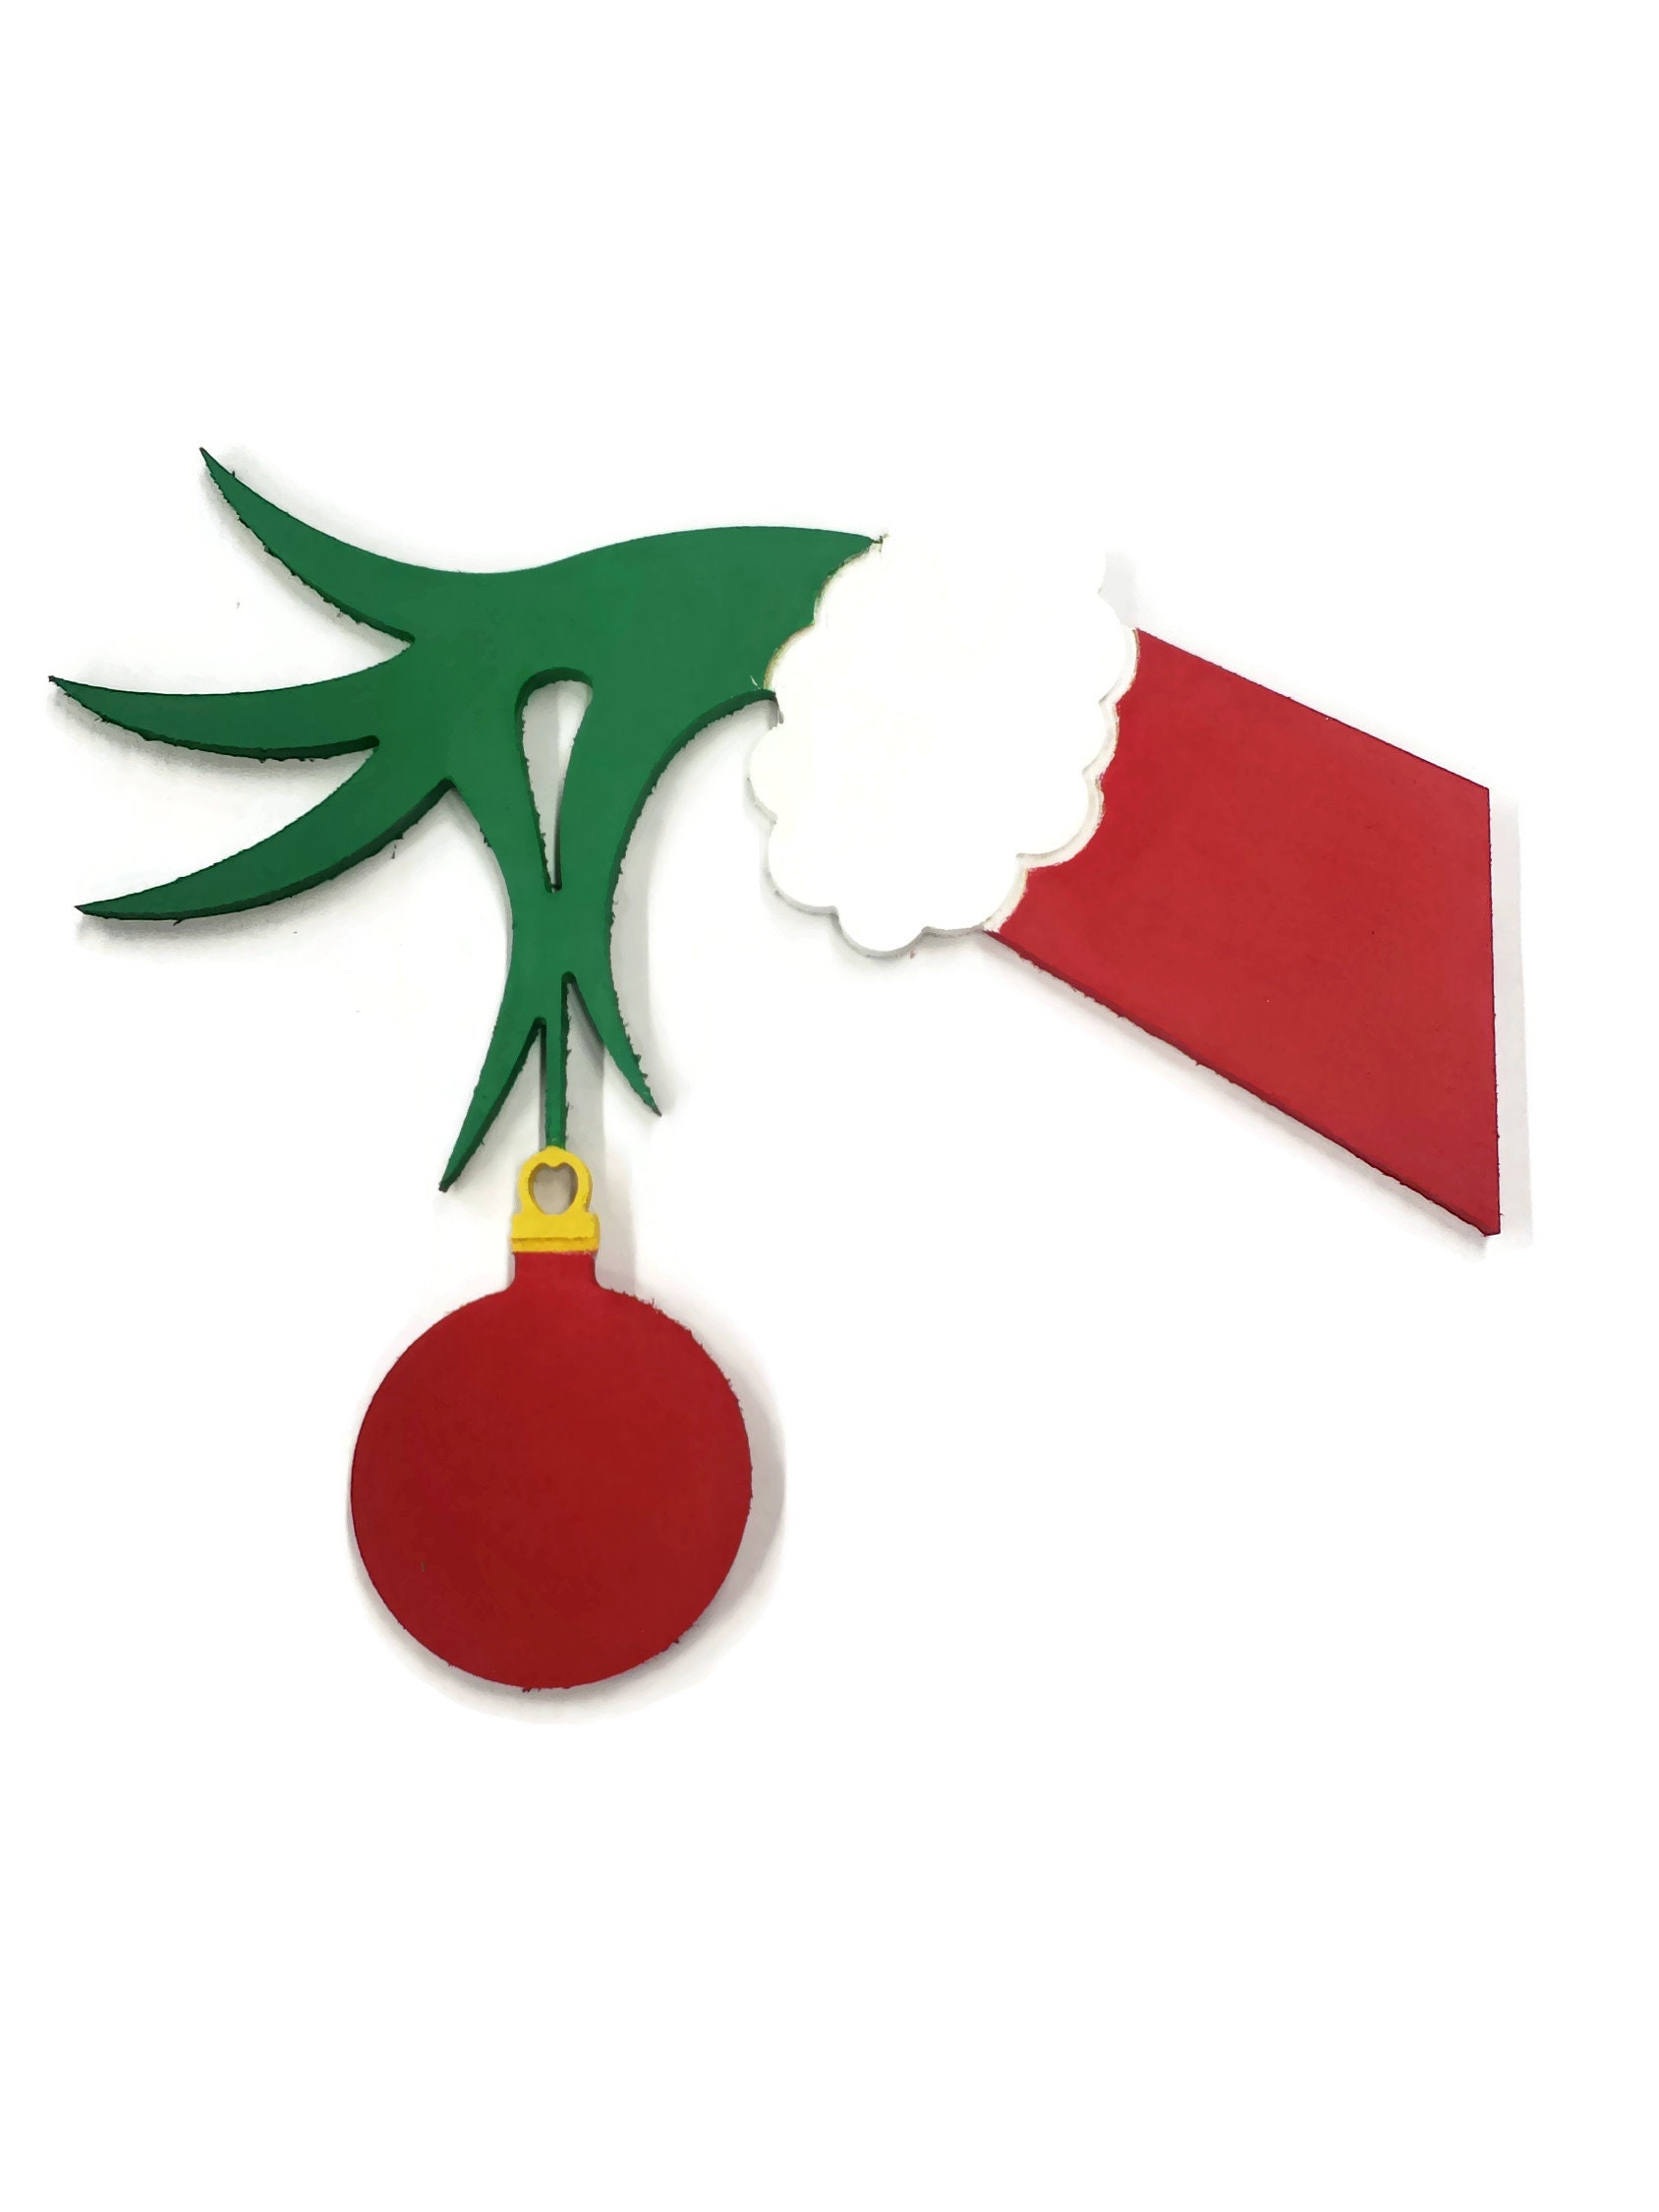 Christmas Hand and Ornament Cutout Finished MDF Wood Etsy.